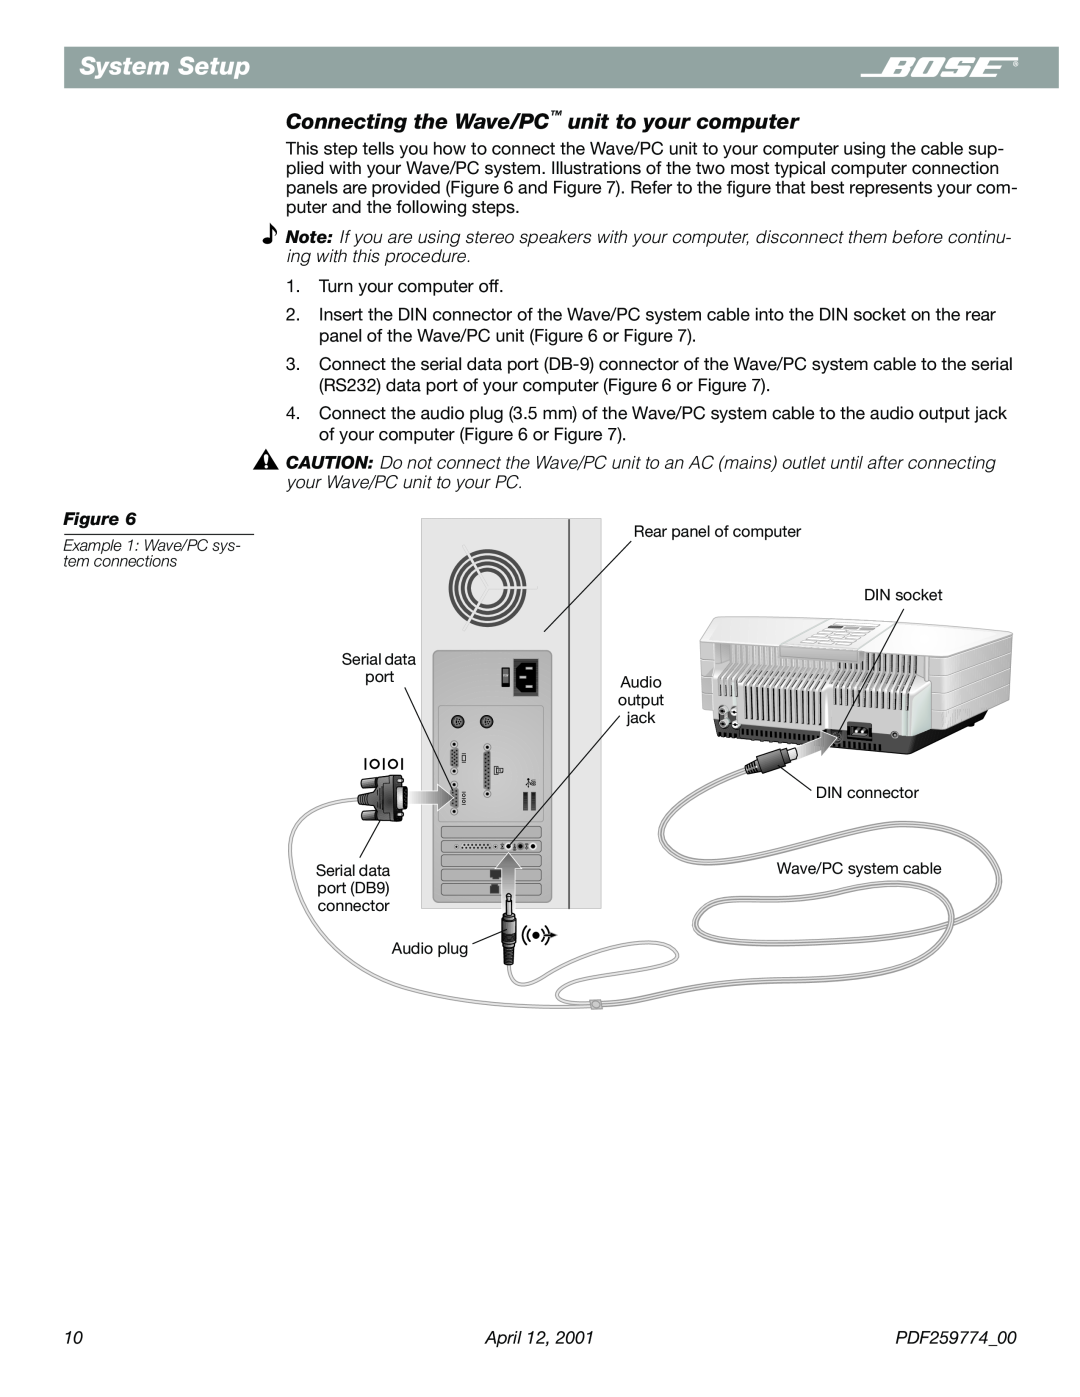 Bose PDF259774_00 manual Connecting the Wave/PC unit to your computer, System Setup 